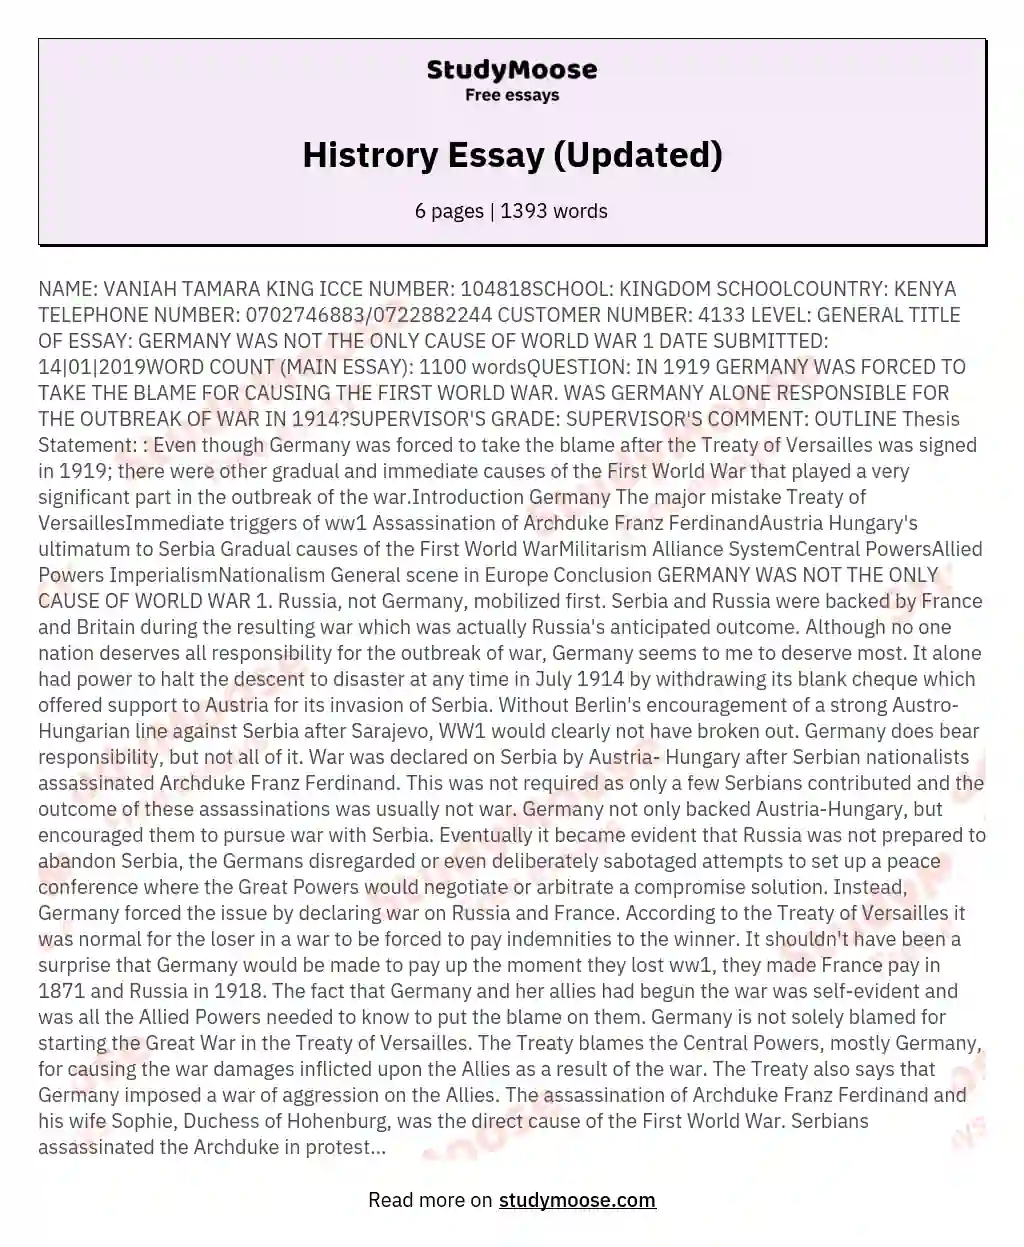 Histrory Essay (Updated) essay